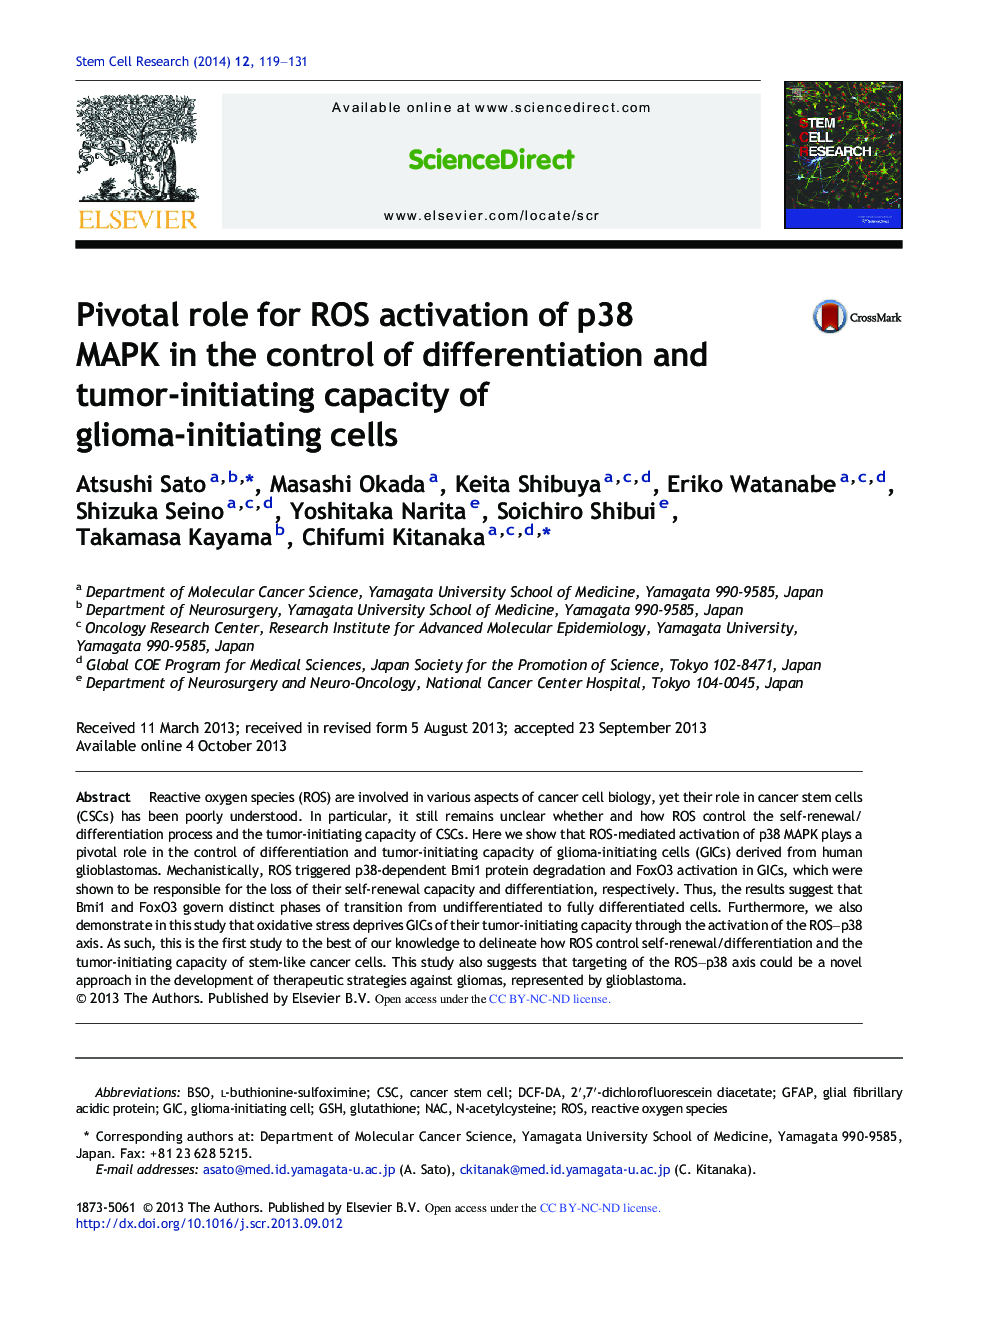 Pivotal role for ROS activation of p38 MAPK in the control of differentiation and tumor-initiating capacity of glioma-initiating cells